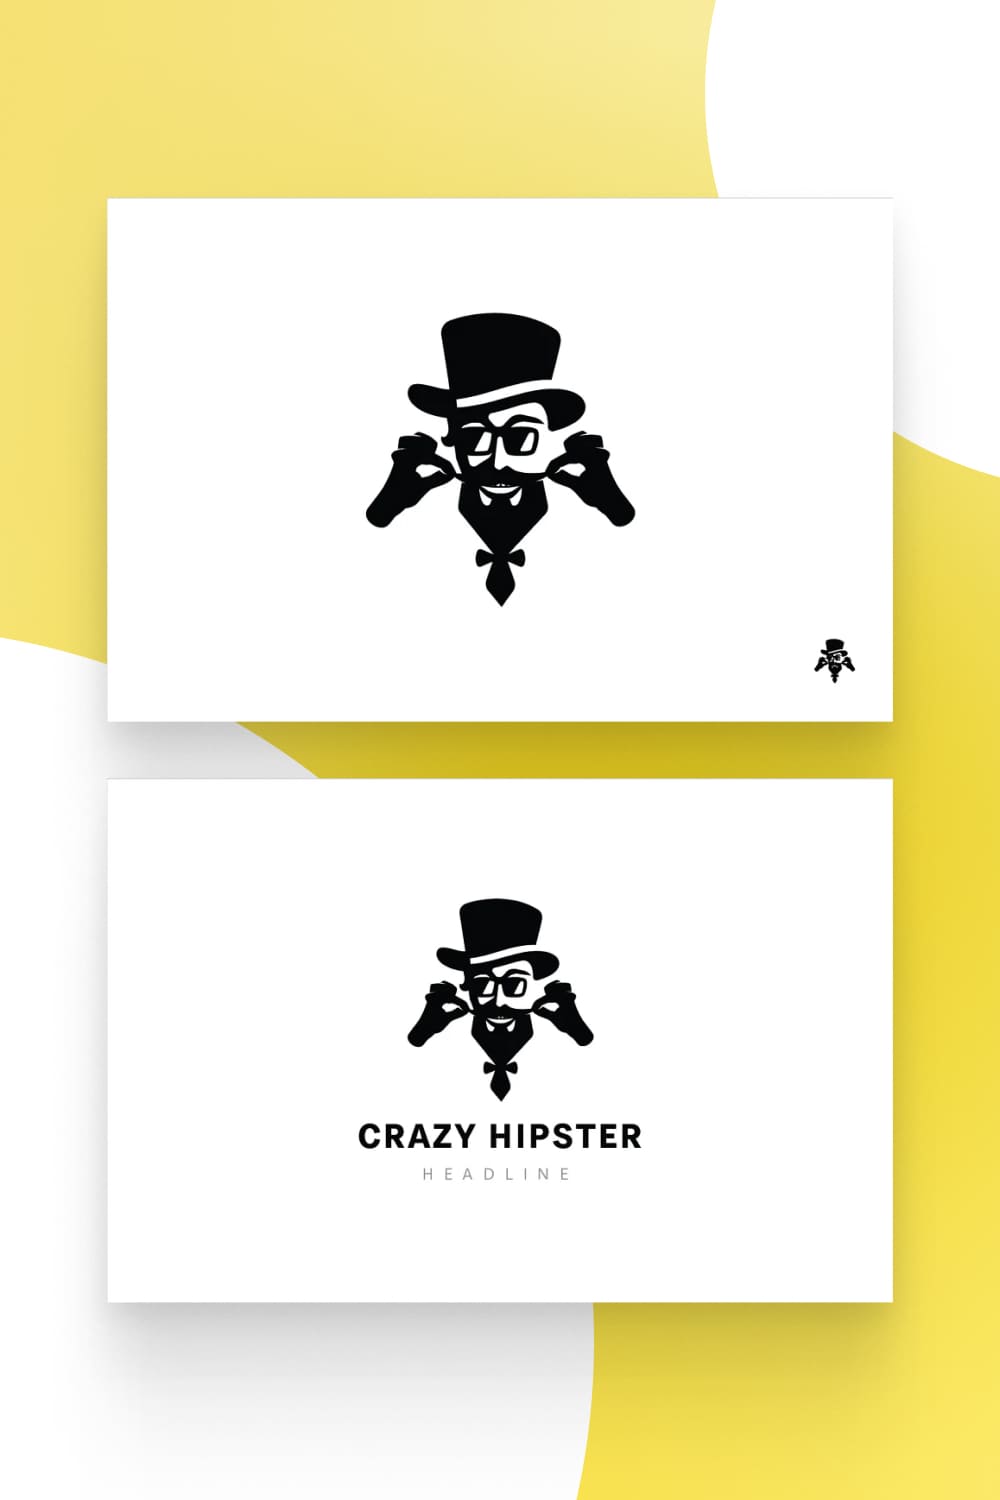 Black and white logos with funny gentleman.